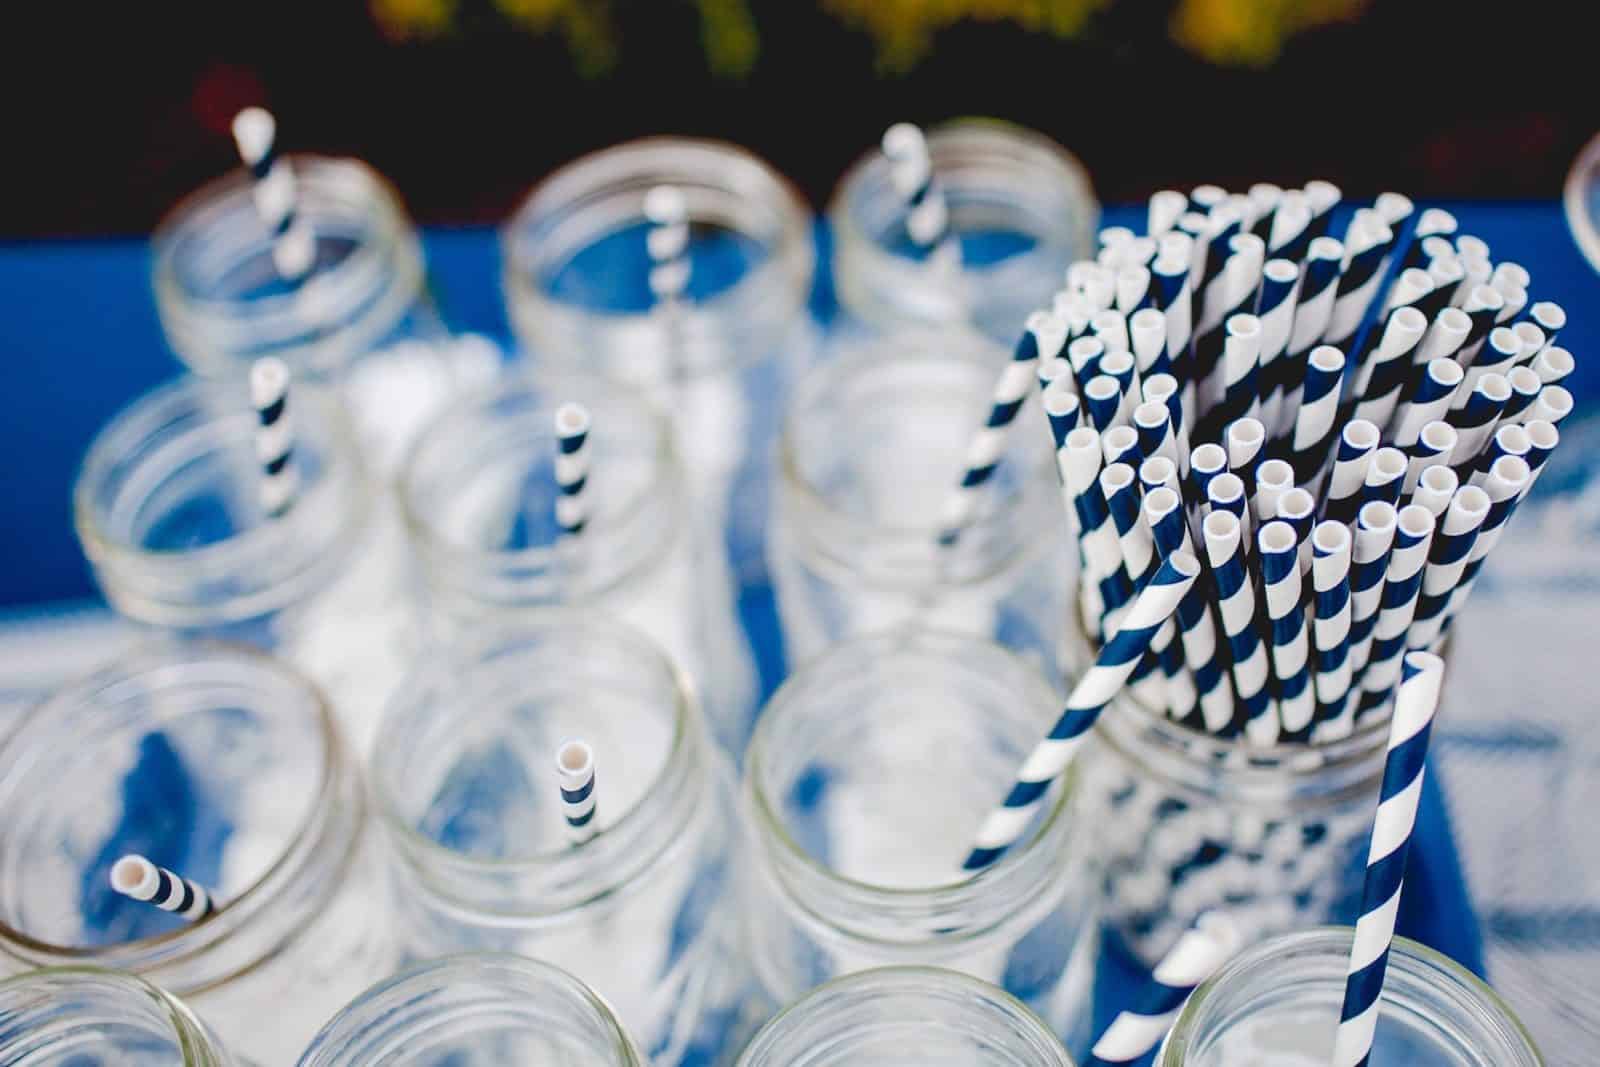 HiP Paris Blog: France's plastic ban on cups, straws and all single use plastic means you should be getting a paper straw like these stripy blue and white ones or no straw at all in your cocktails in Paris and across the country from now on.